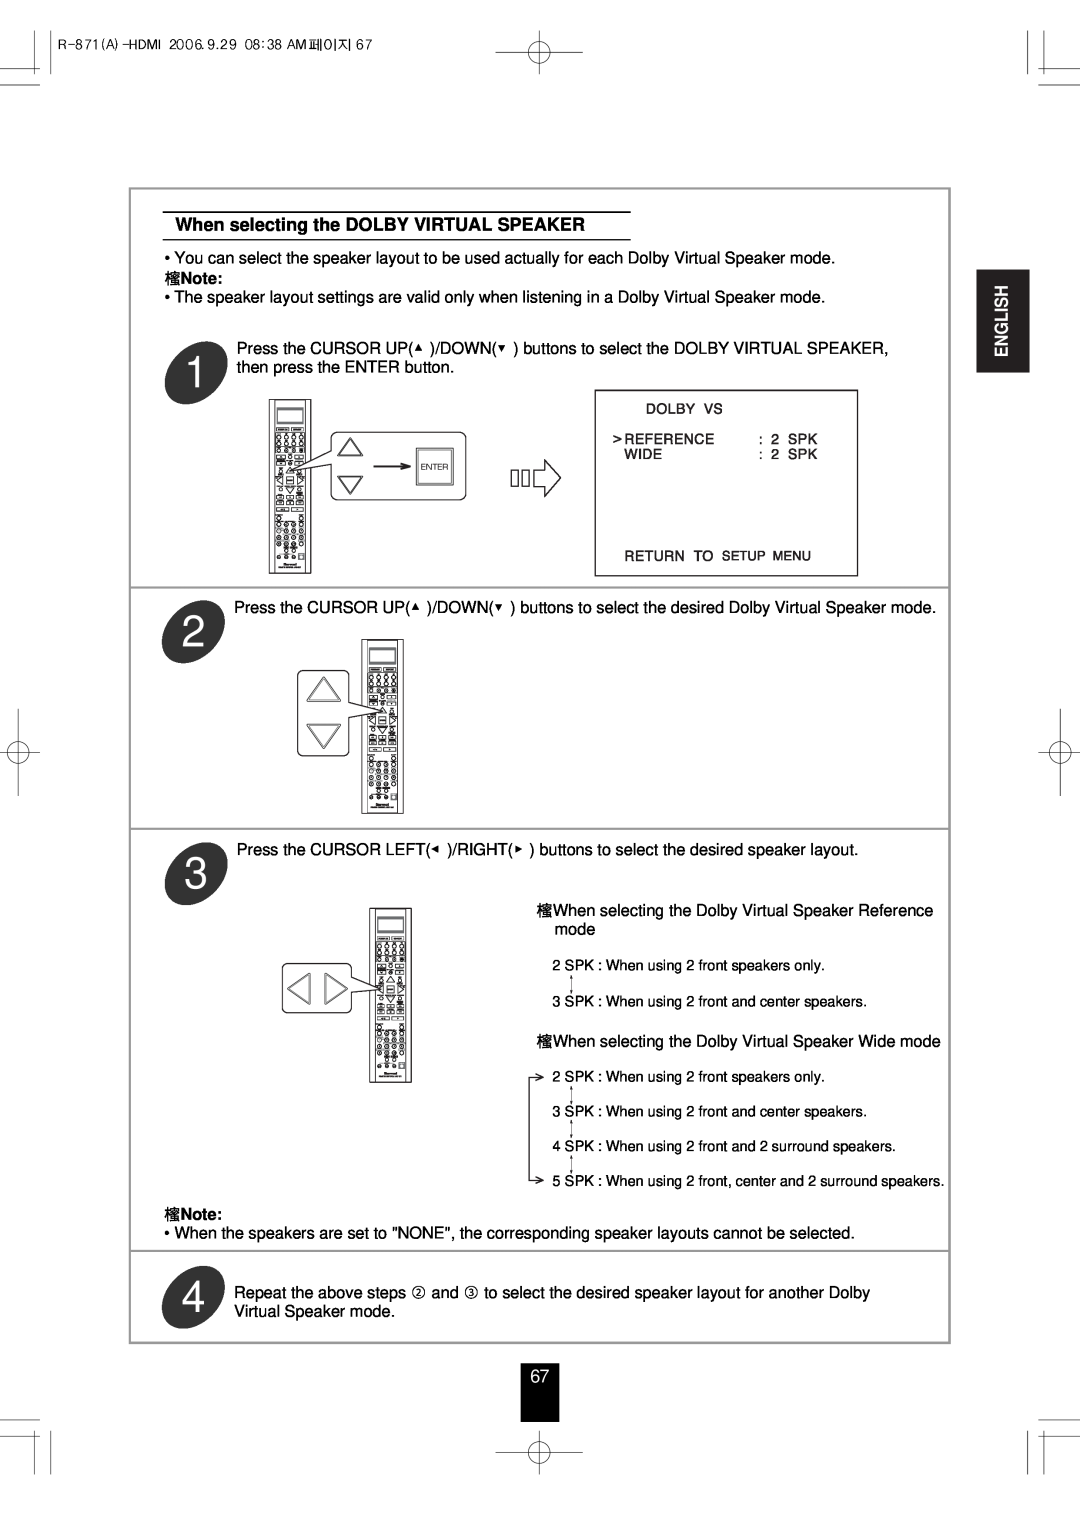 Sherwood R-871 manual When selecting the DOLBY VIRTUAL SPEAKER, English 